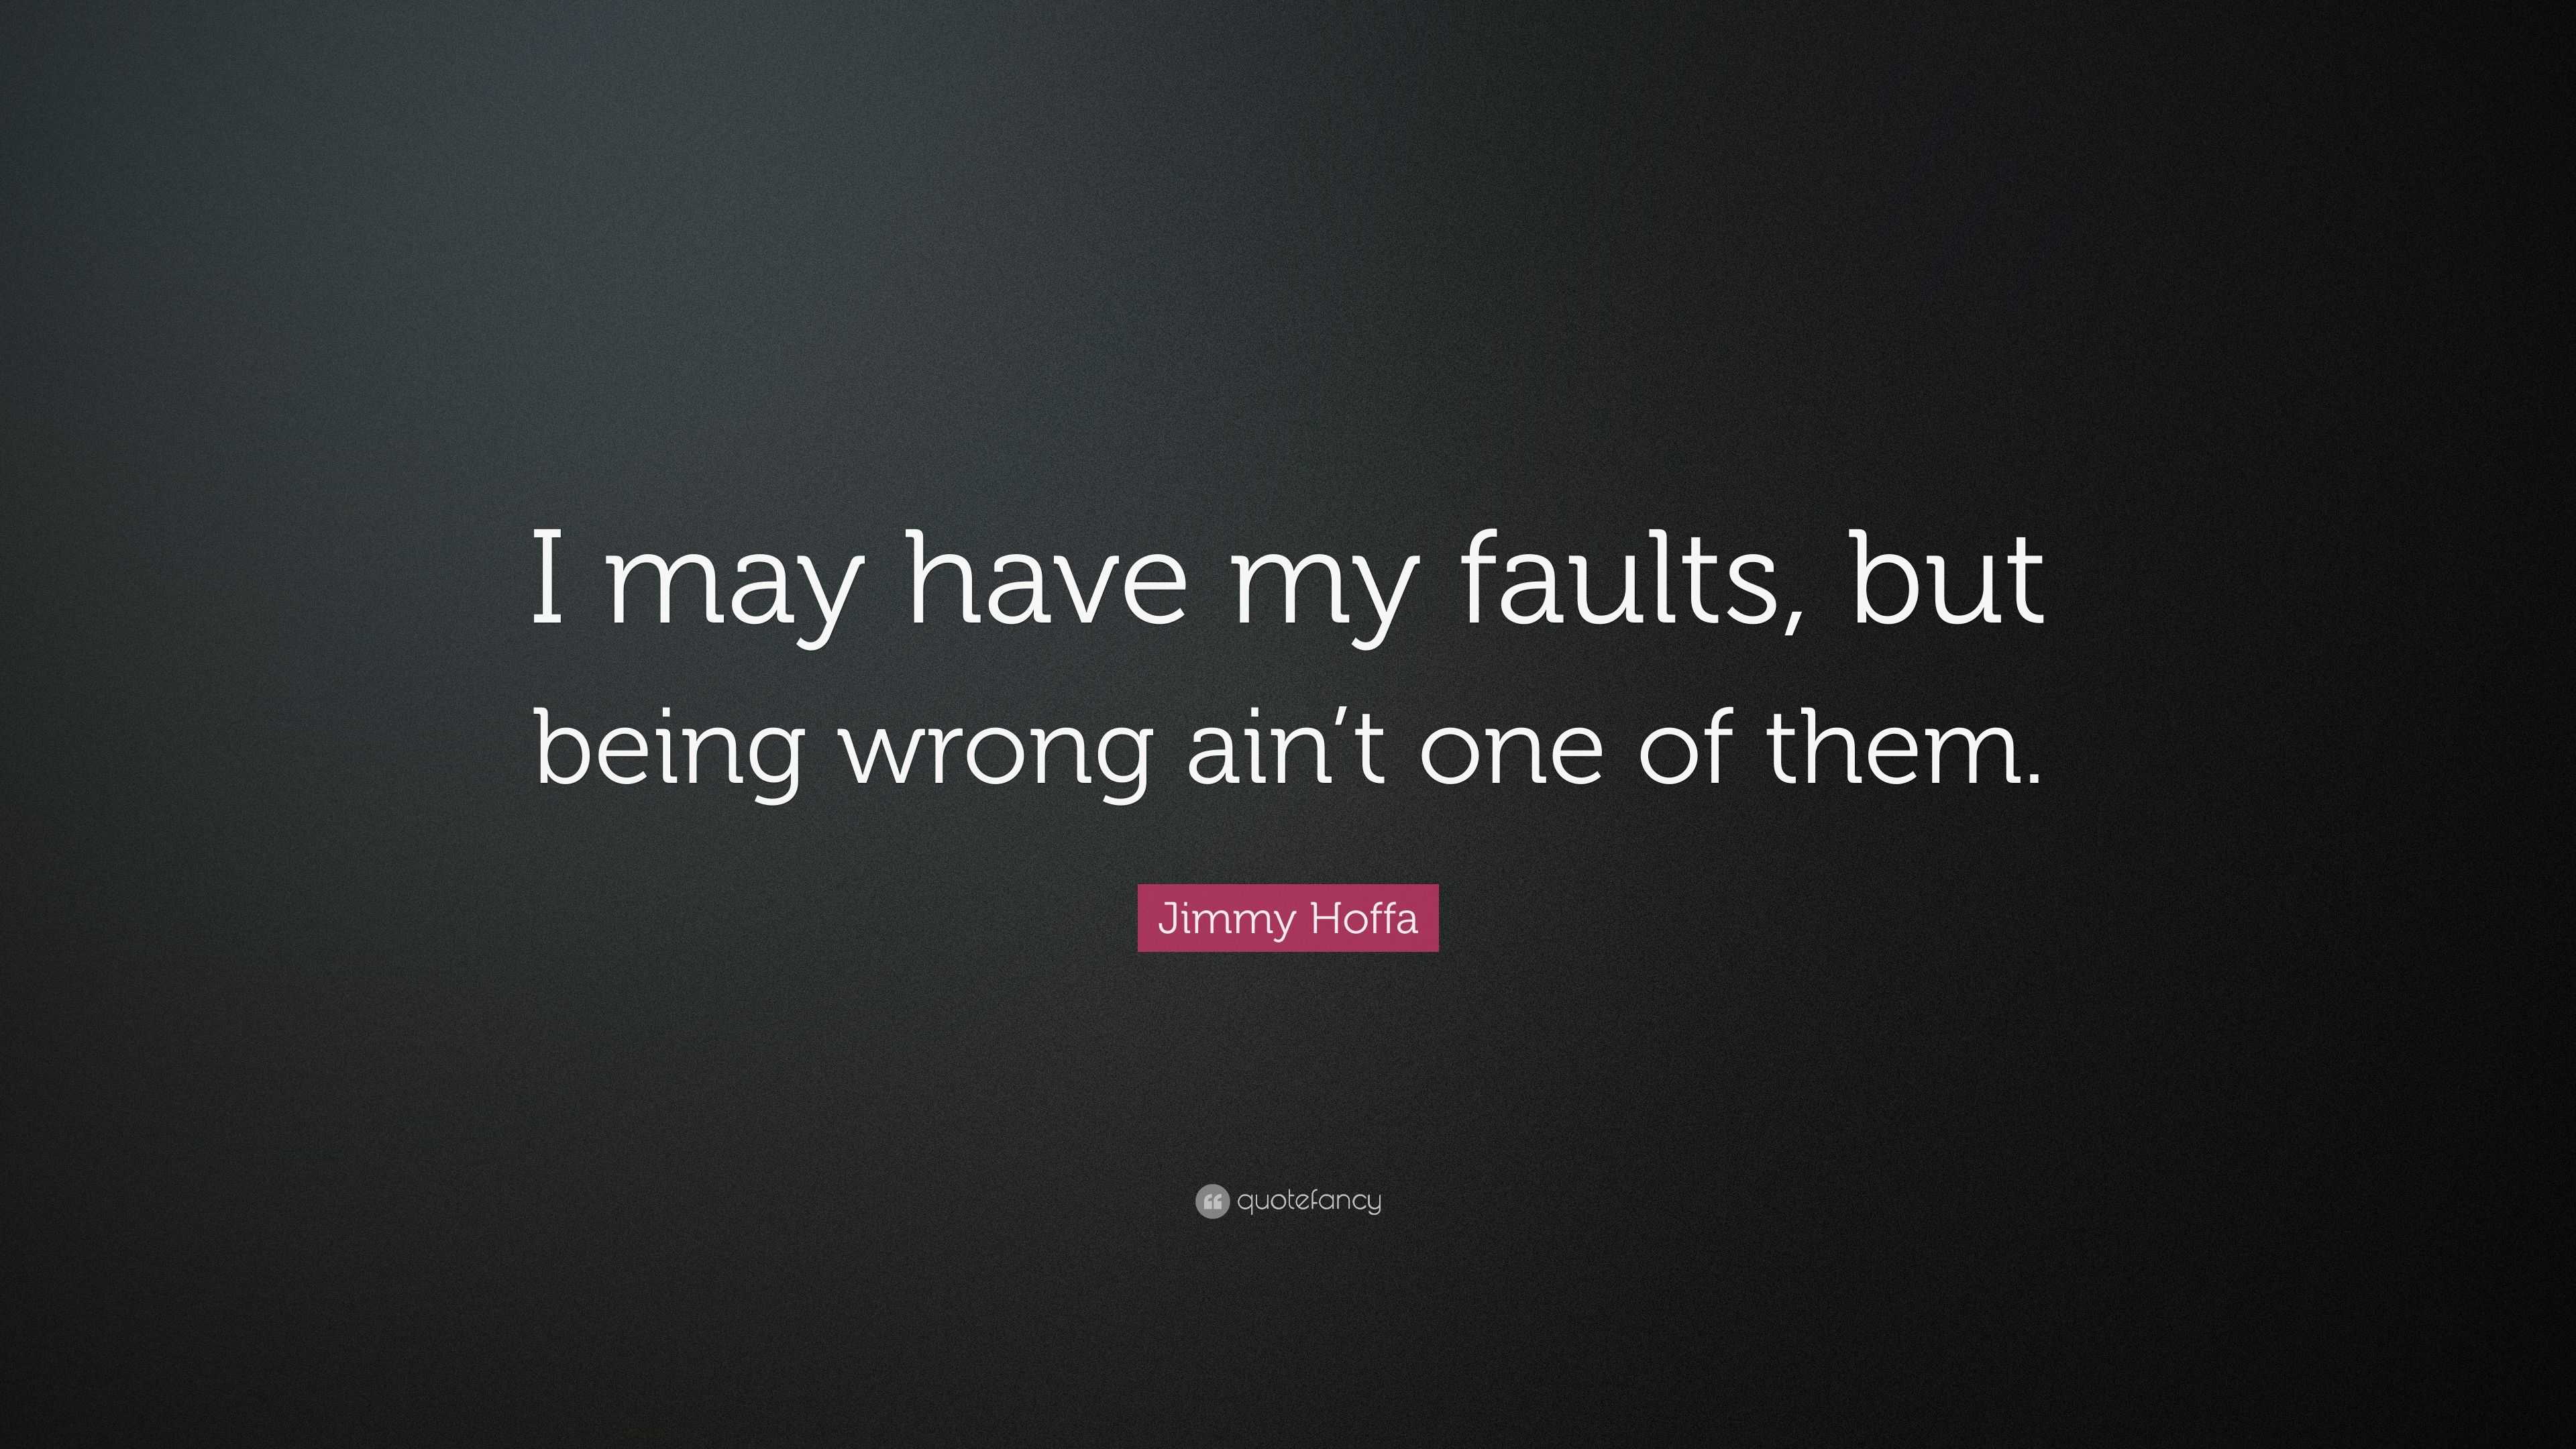 Jimmy Hoffa Quote: “I may have my faults, but being wrong ain’t one of ...